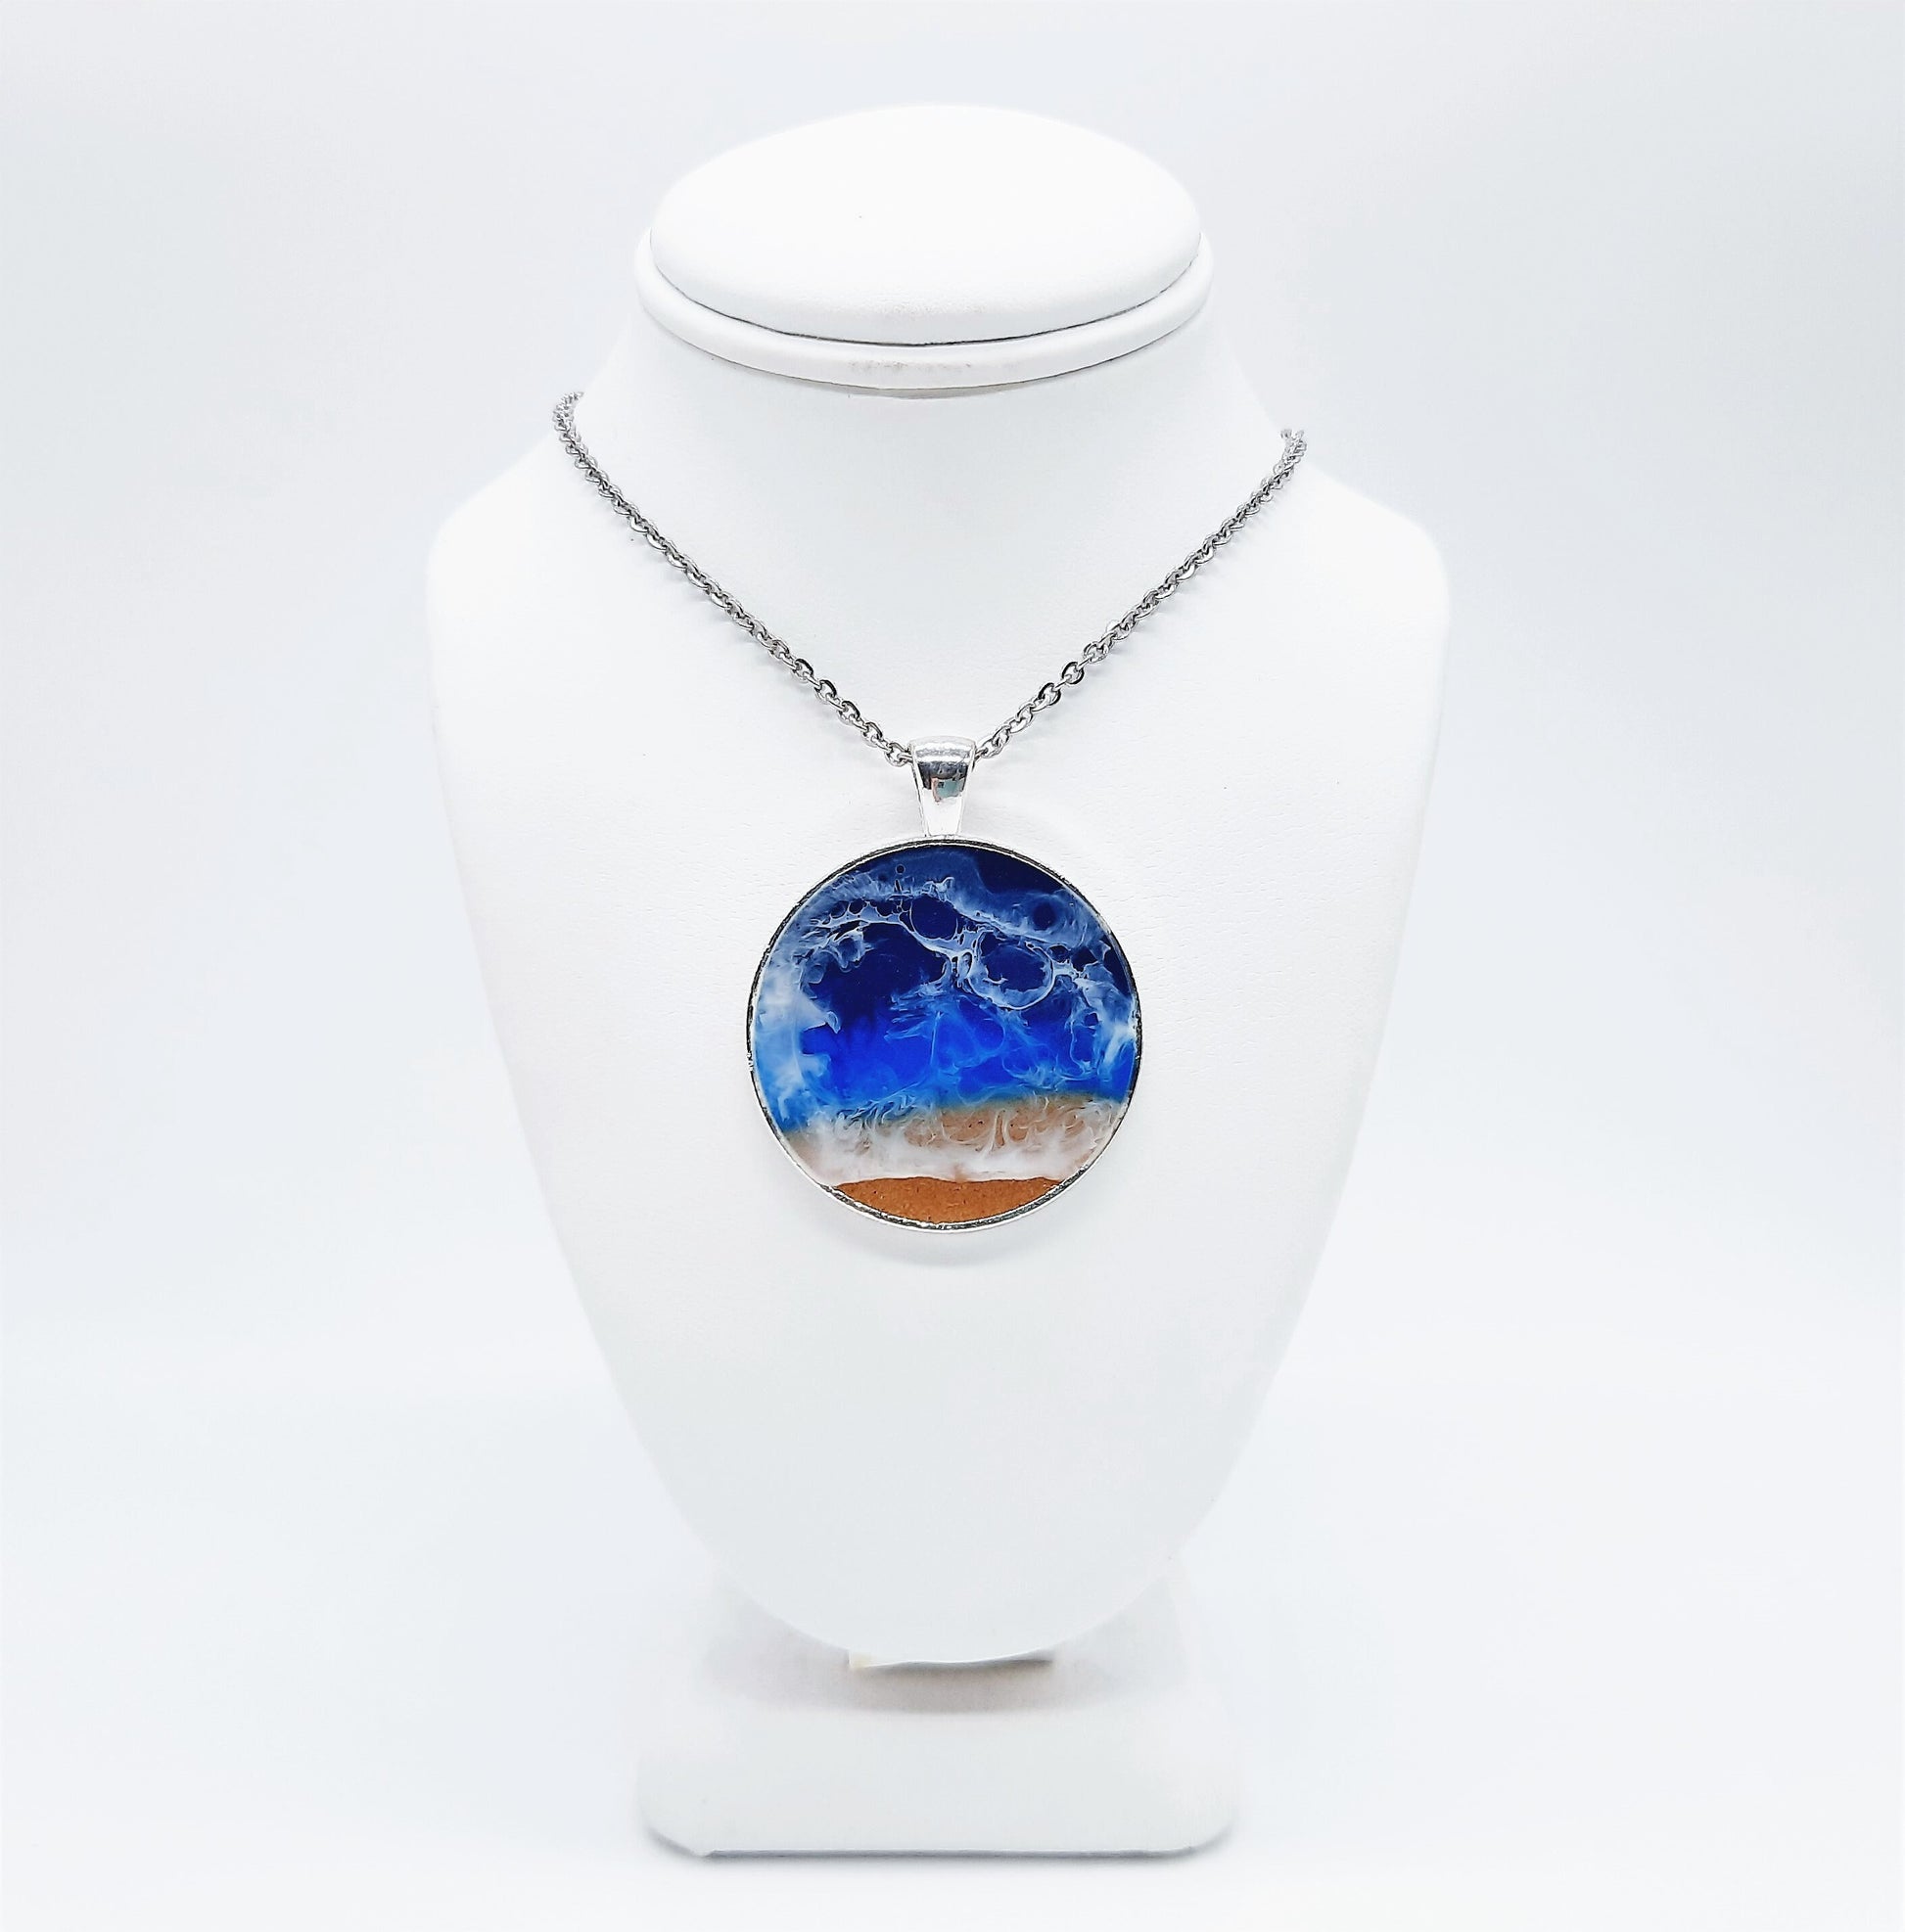 Resin Waves Large Round Shaped Ocean Pendant / Beach Scene Necklace, Handmade with Resin & Real Sand - One of a Kind - Not a Photograph!